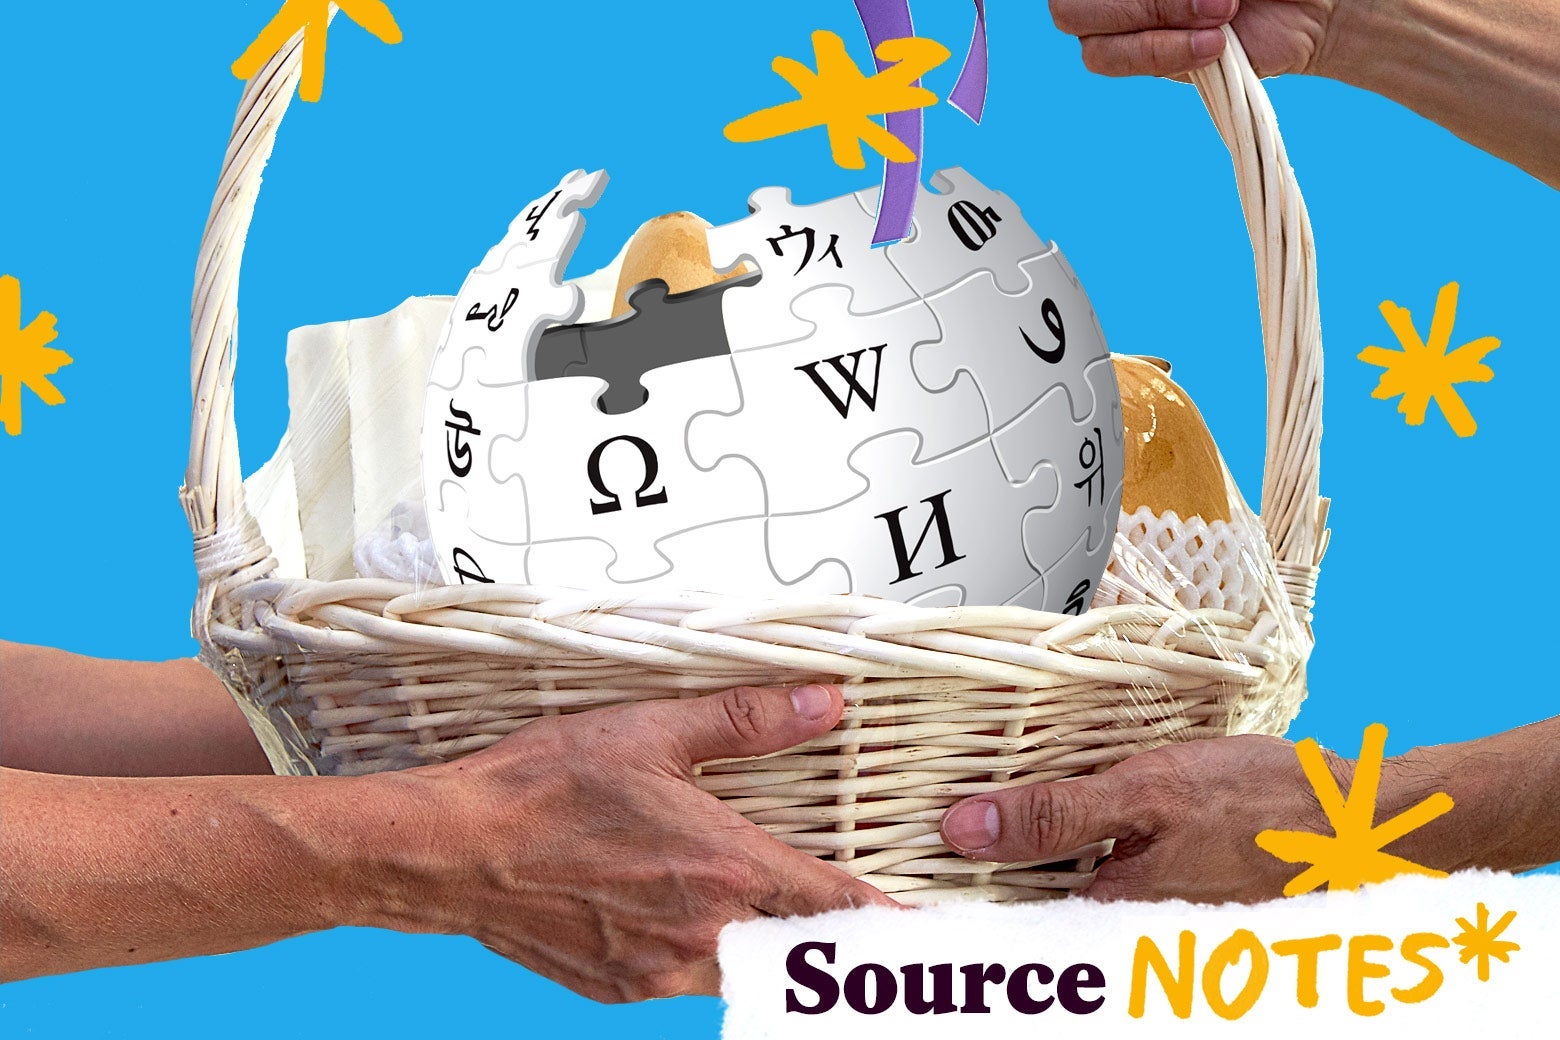 A Wikipedia globe in a gift basket being handed from one person to another